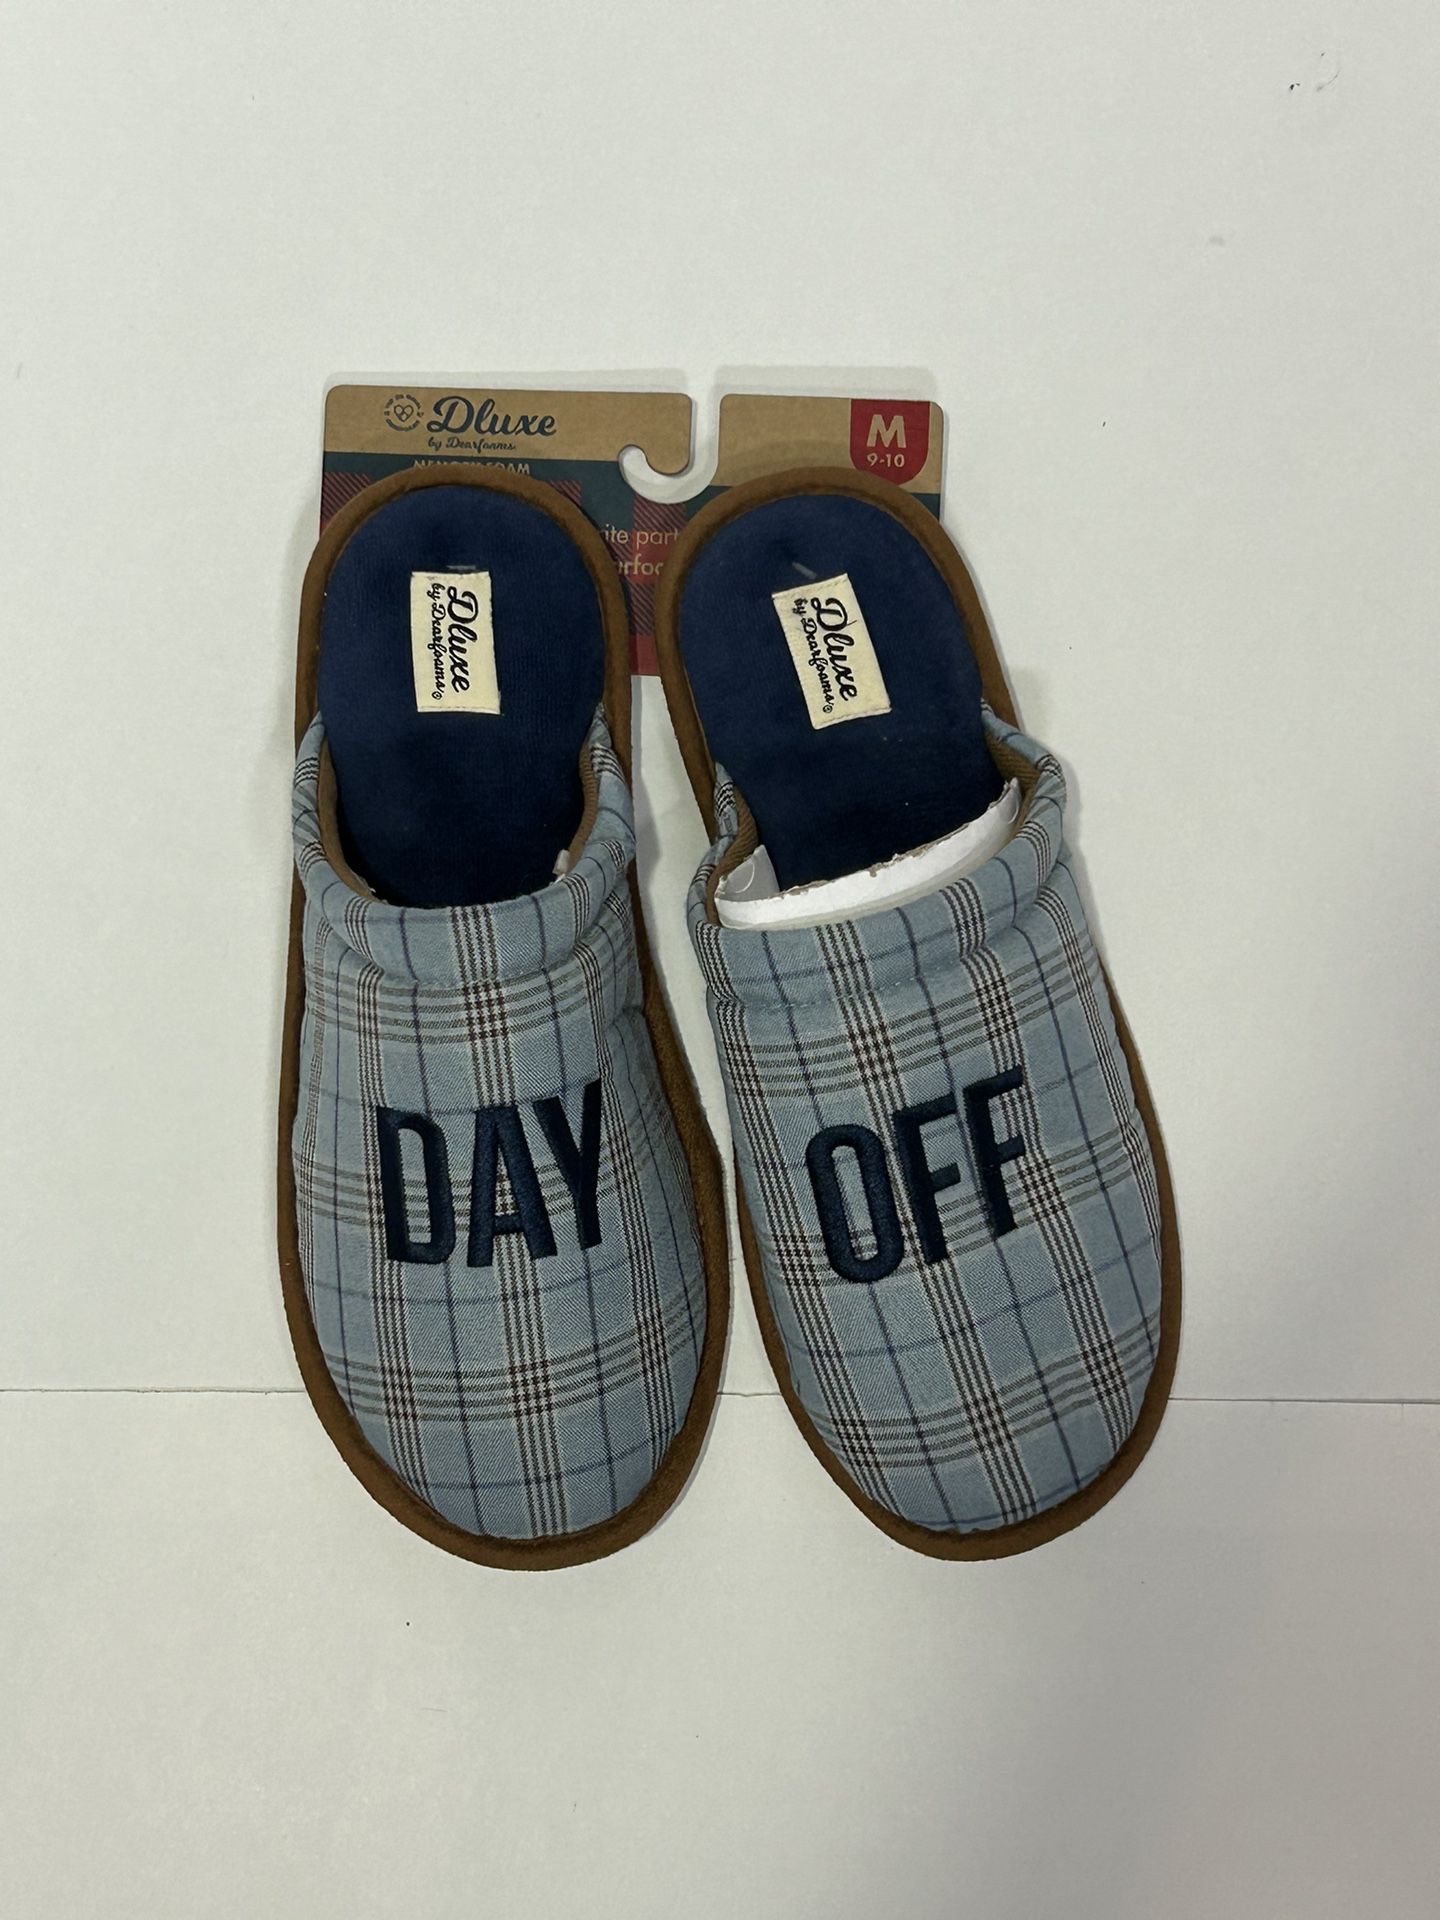 M/9-10 Deluxe “Day Off” Slippers Brand New